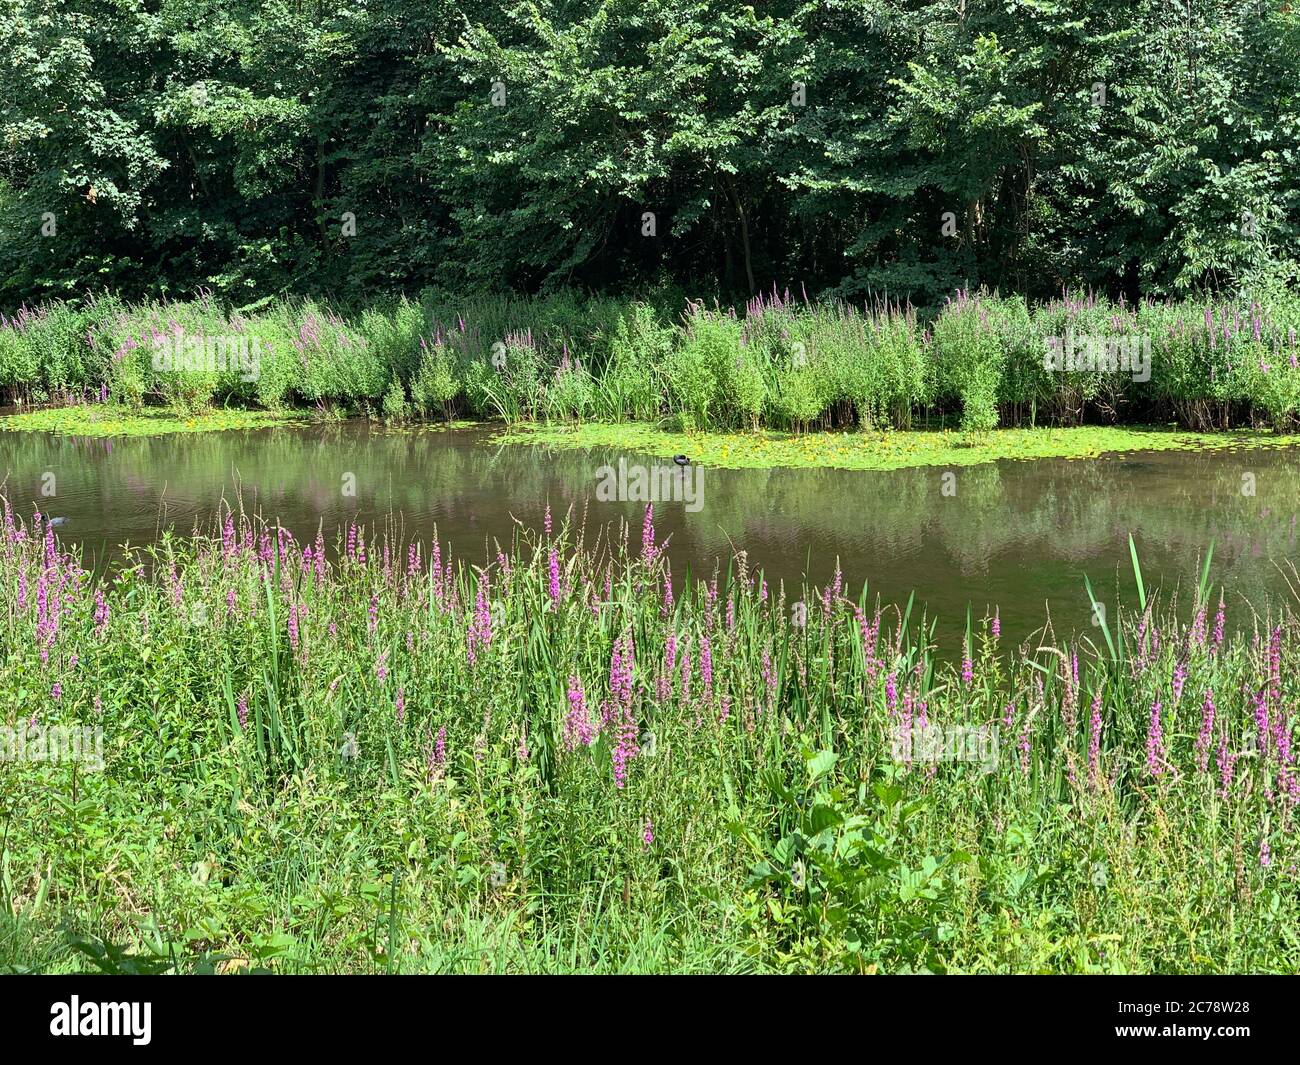 Pond and wild flowers, Epping Forest, London Stock Photo